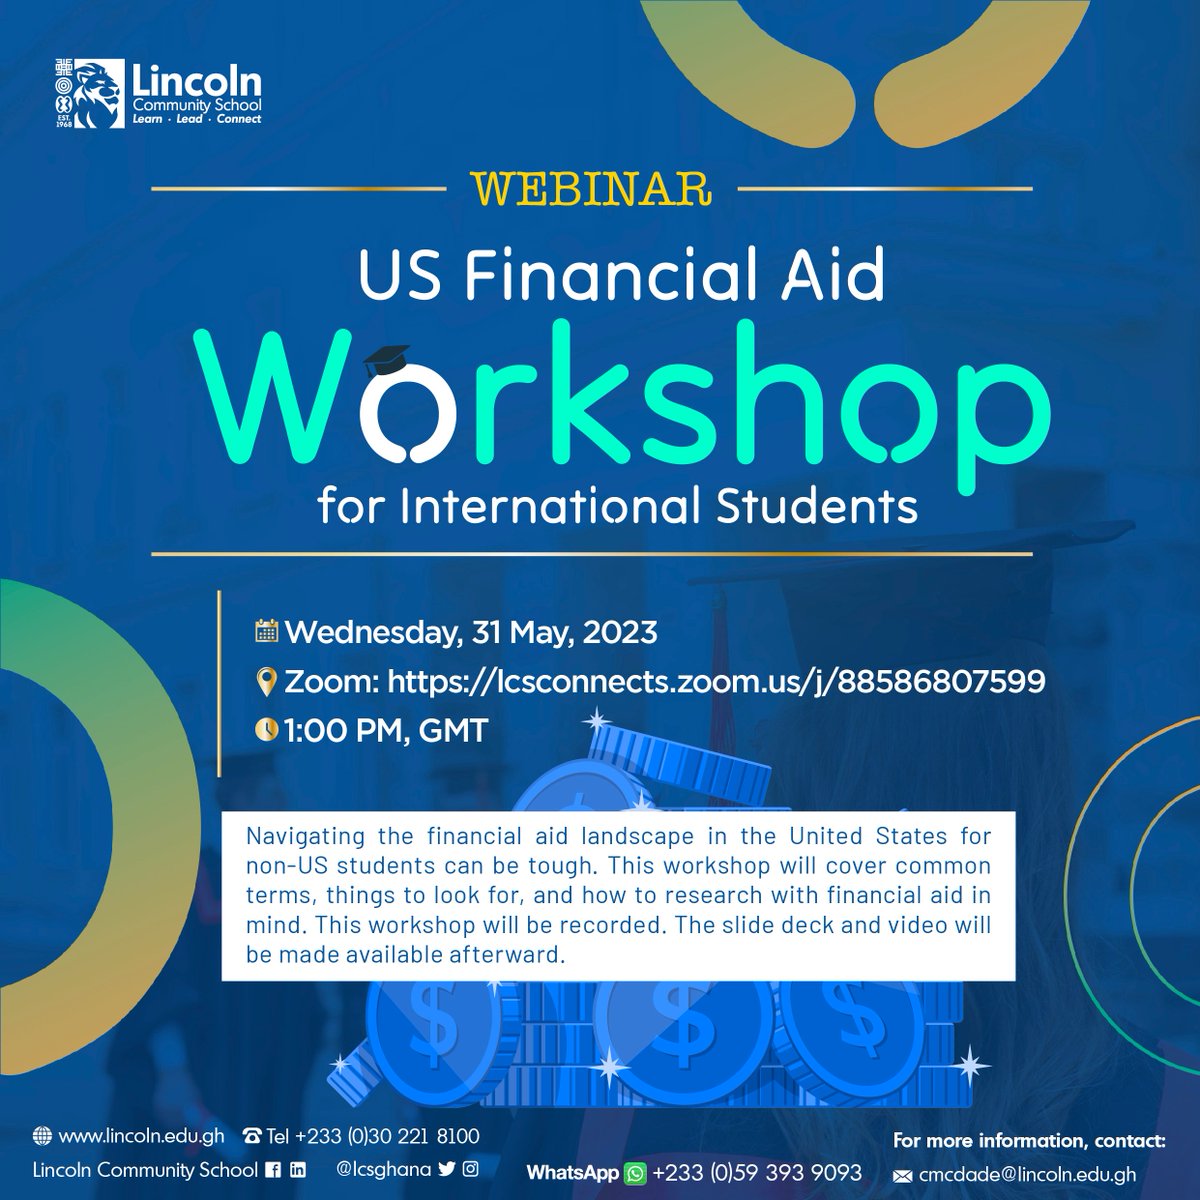 US Financial Aid for International Students Workshop.
Please join Ms. Christina (HIGH SCHOOL/COLLEGE COUNSELOR) as she gives an online workshop on understanding US Financial Aid for International Students on 31 May at 1pm. 
#lscghana #workshop #financialaid #expertadvice